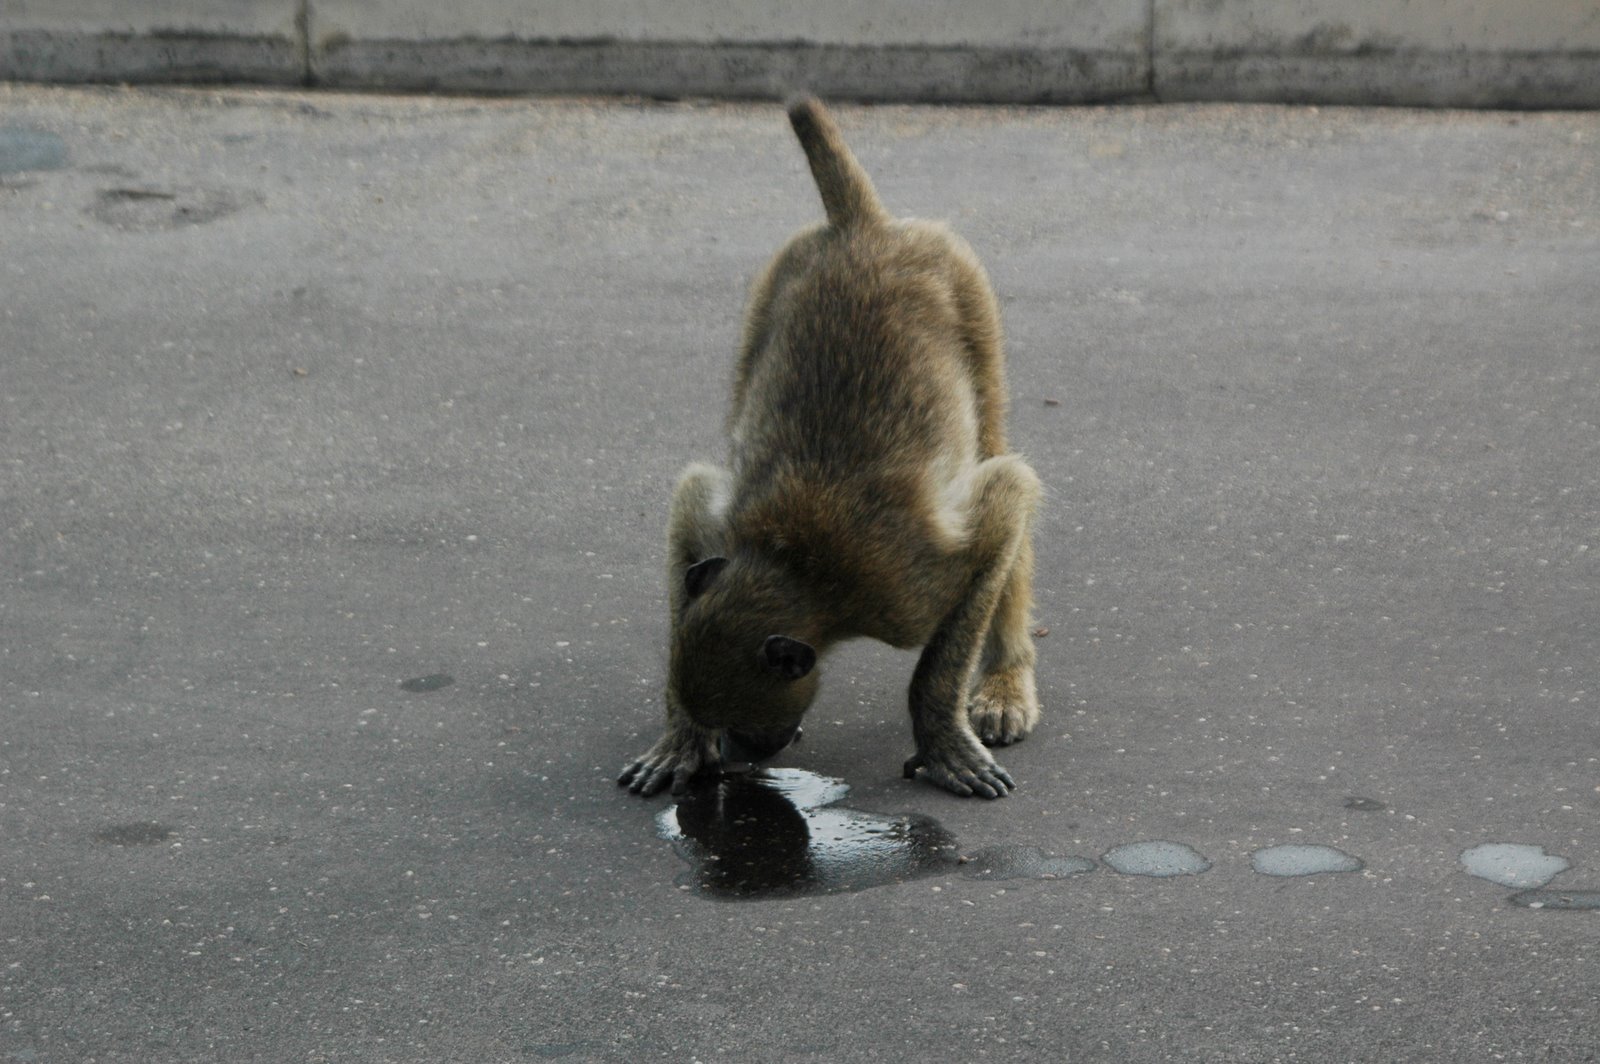 [baboon+drinking+water+from+road.jpg]